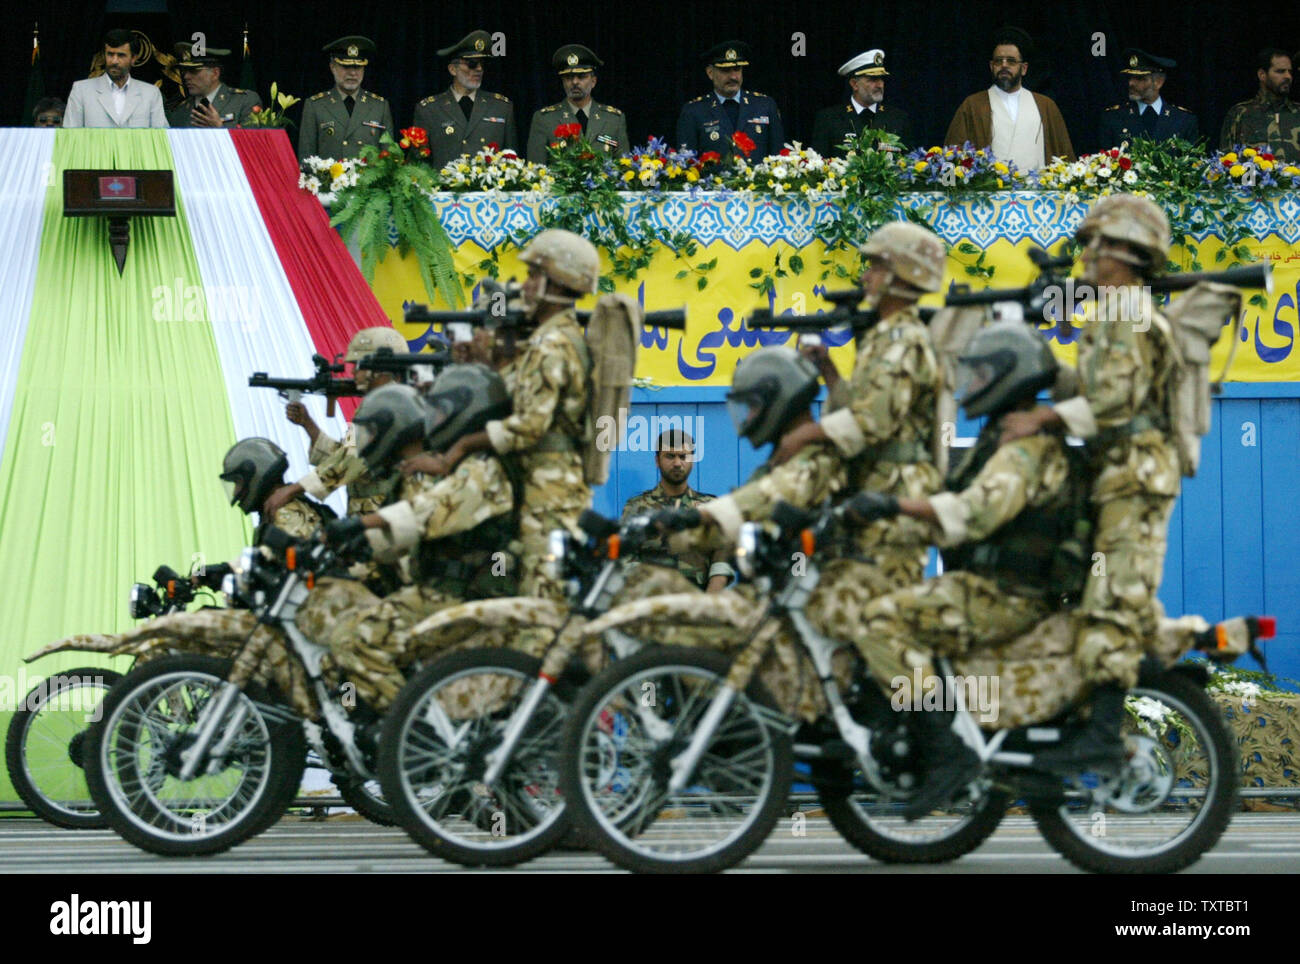 Iranian armed forces ride motorbikes as Iran's president Mahmoud Ahmadinejad (L) watches during Iran's army day in front of the mausoleum of the late revolutionary founder Ayatollah Ruhollah Khomeini, just outside Tehran, Iran, April 18, 2006. (UPI Photo/Mohammad Kheirkhah) Stock Photo